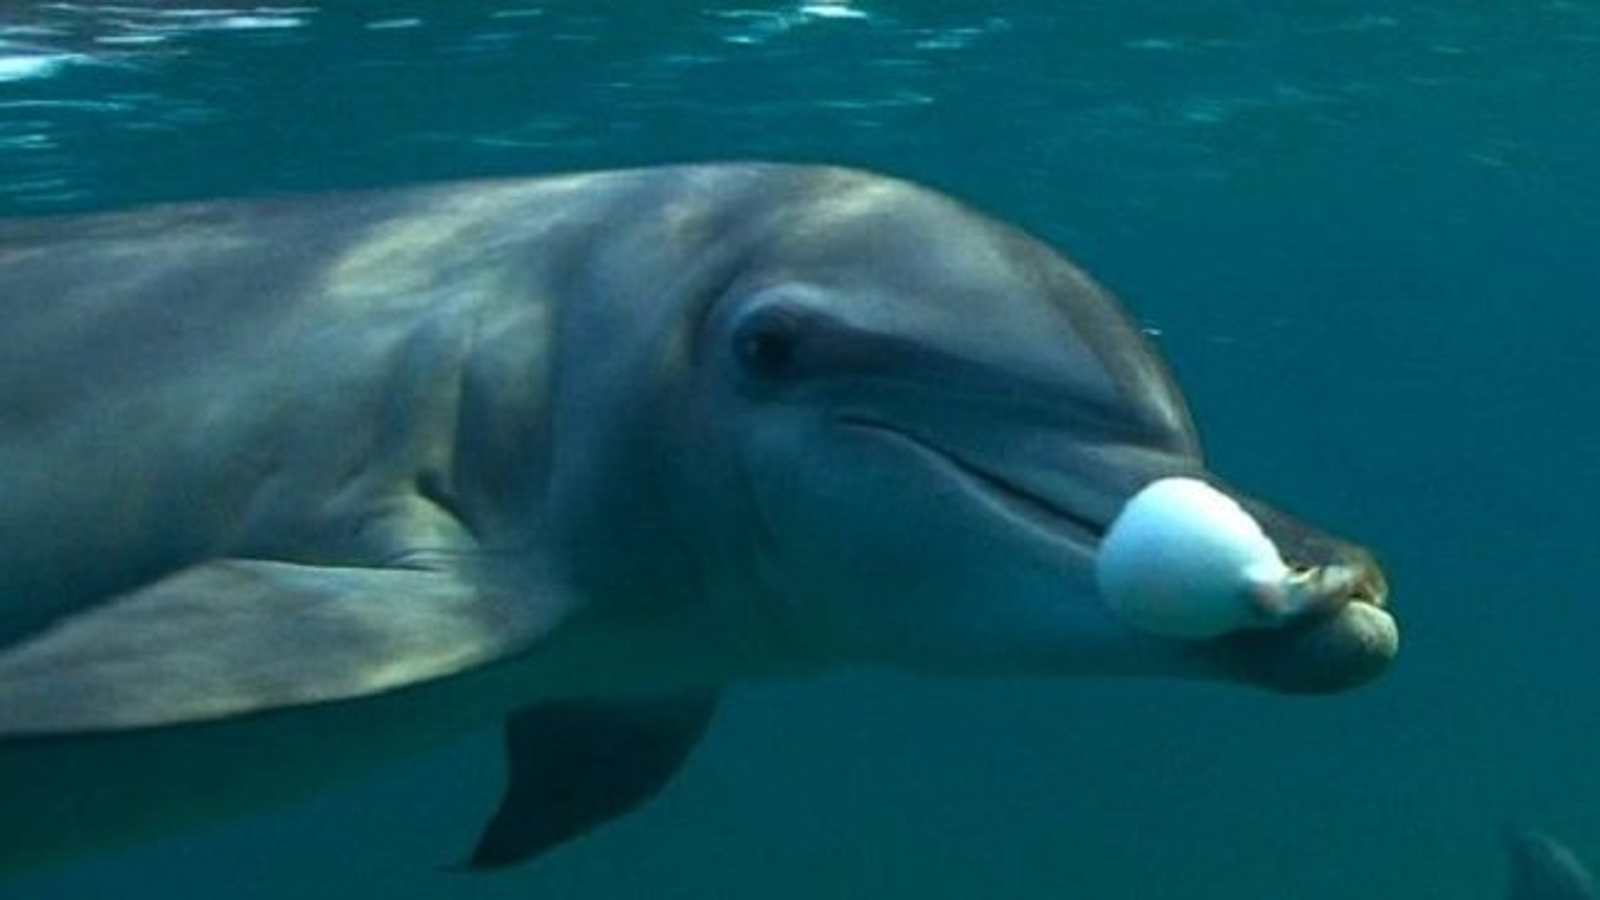 show me a picture of a dolphin fish